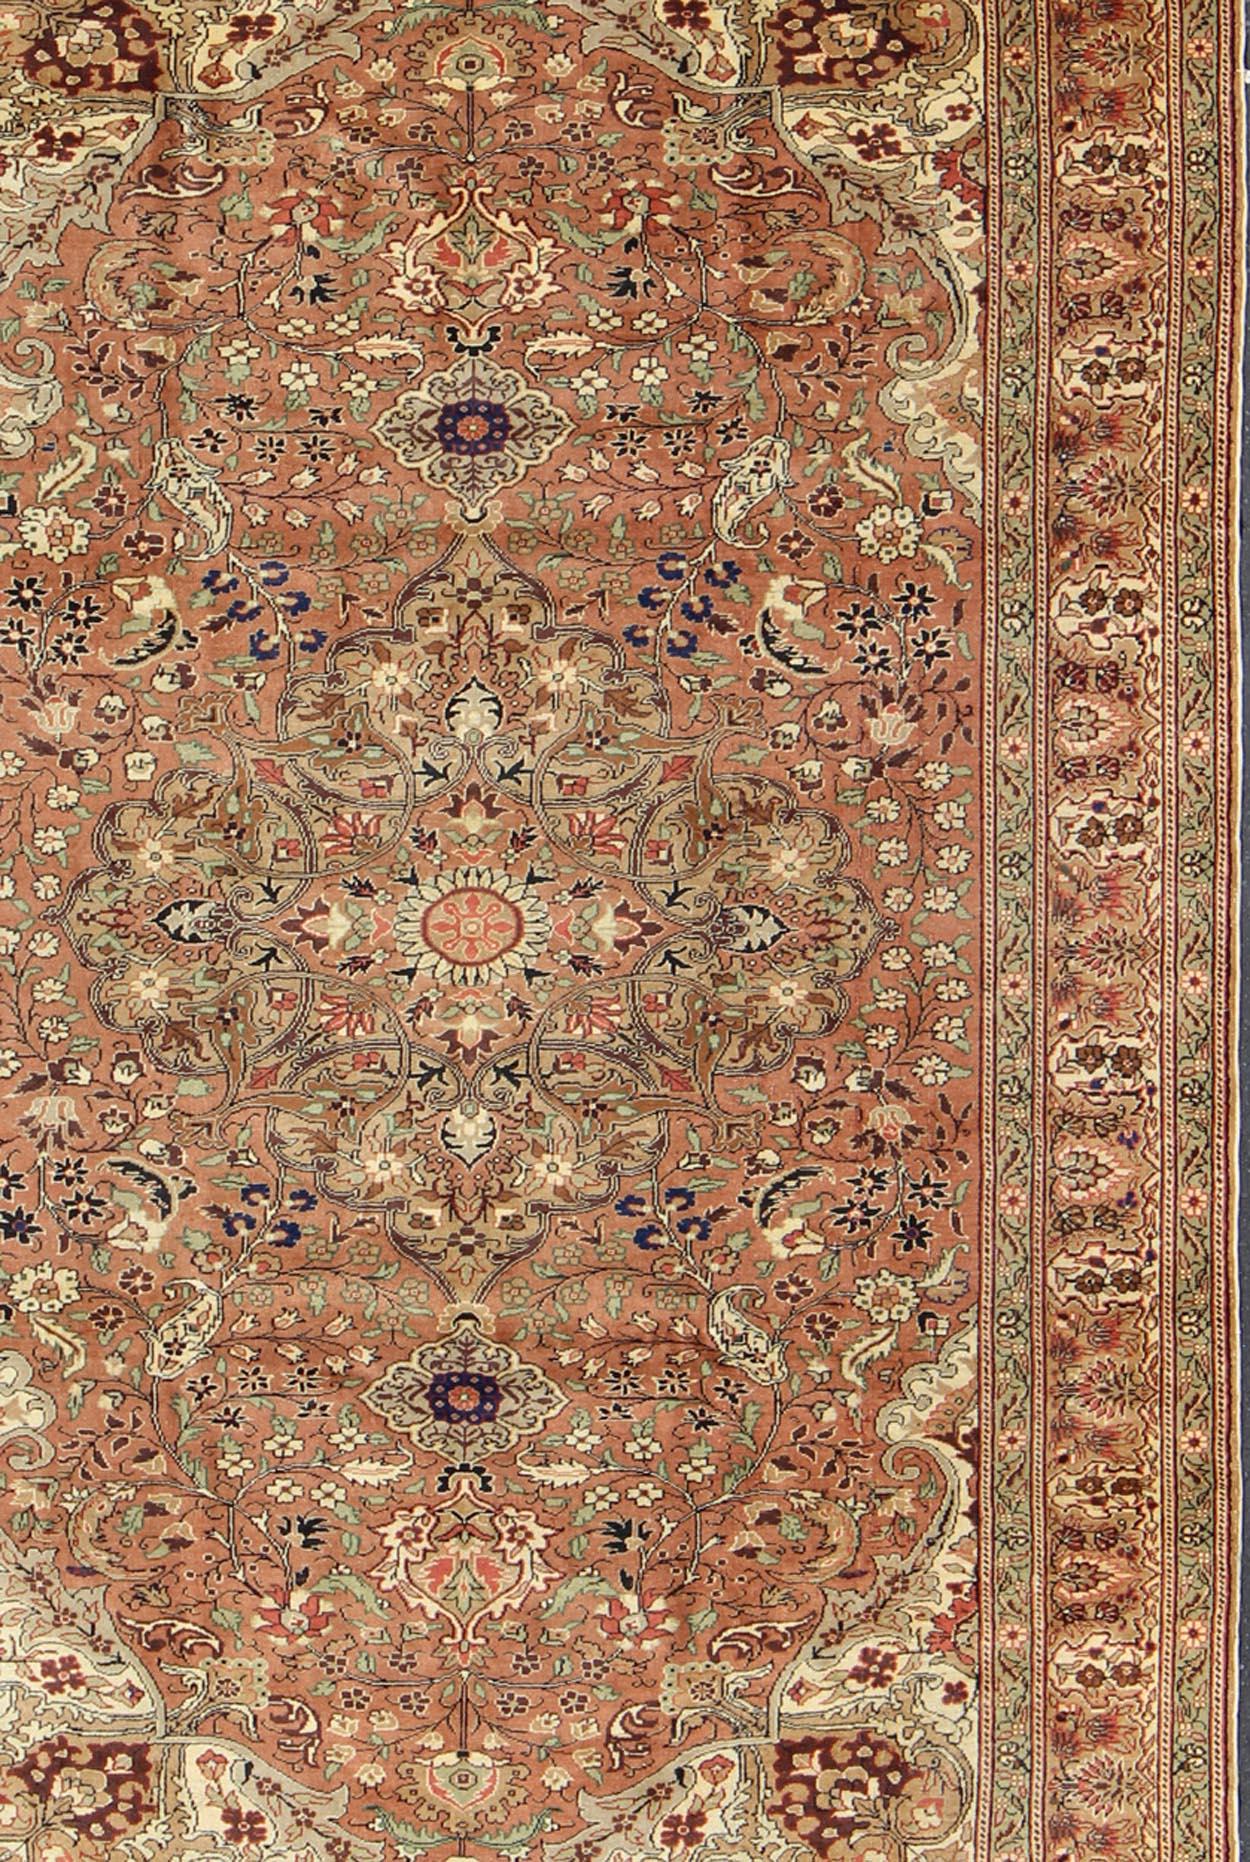 Hand-Knotted Vintage Turkish Kaysari Rug with Dazzling Sub-Geometric and Floral Motifs